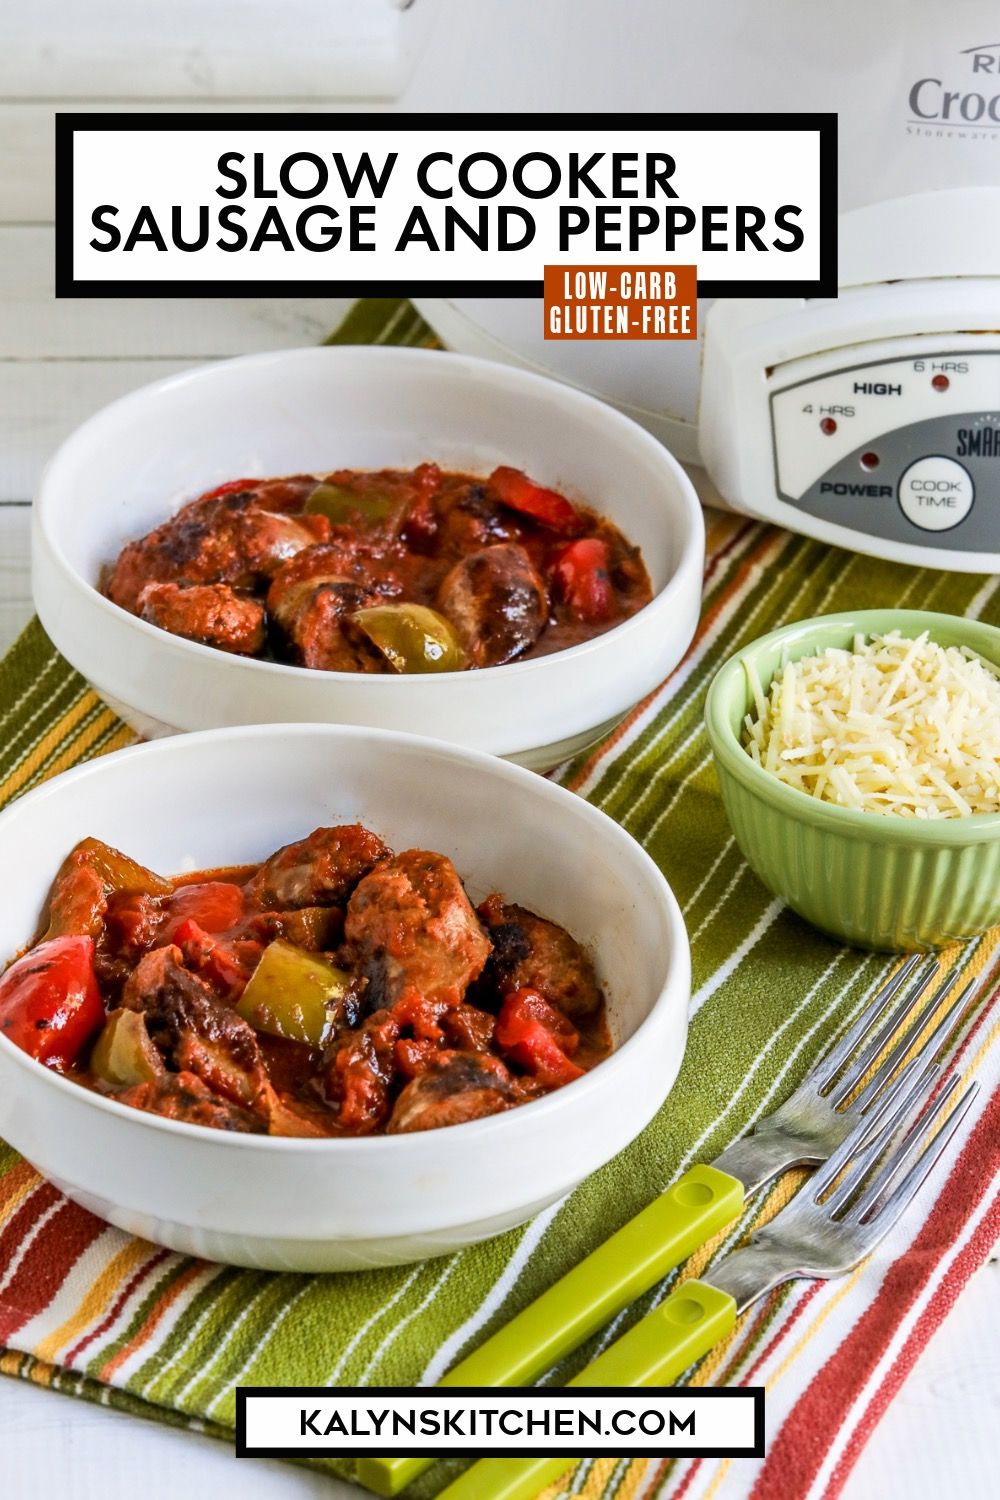 Pinterest image for Slow Cooker Sausage and Peppers shown in two bowls with slow cooker and Parmesan in background.